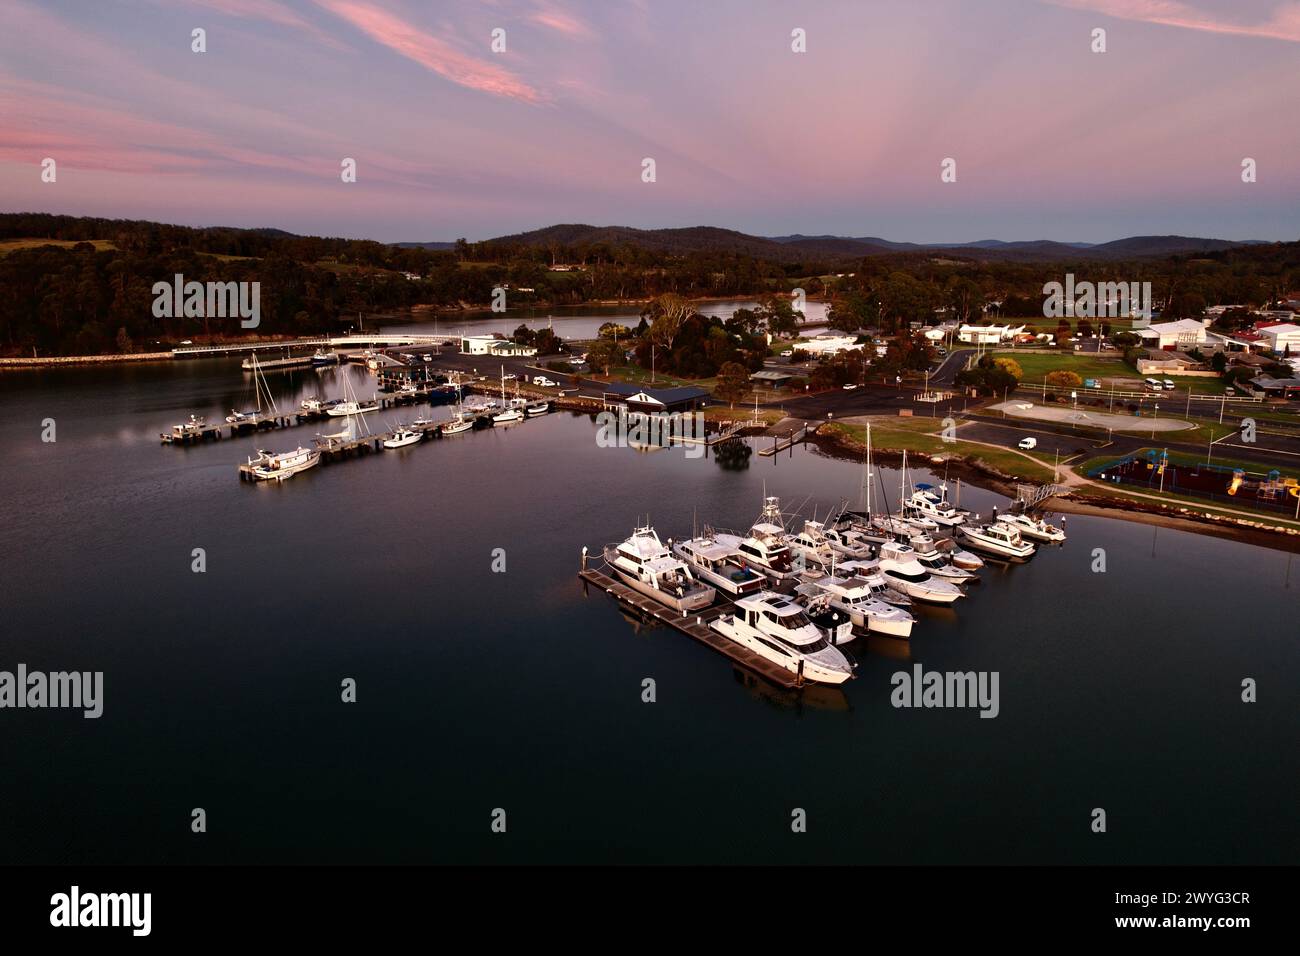 A beautiful pink sunset over Saint Helen's harbour Tasmania with boats docked on calm waters. Stock Photo